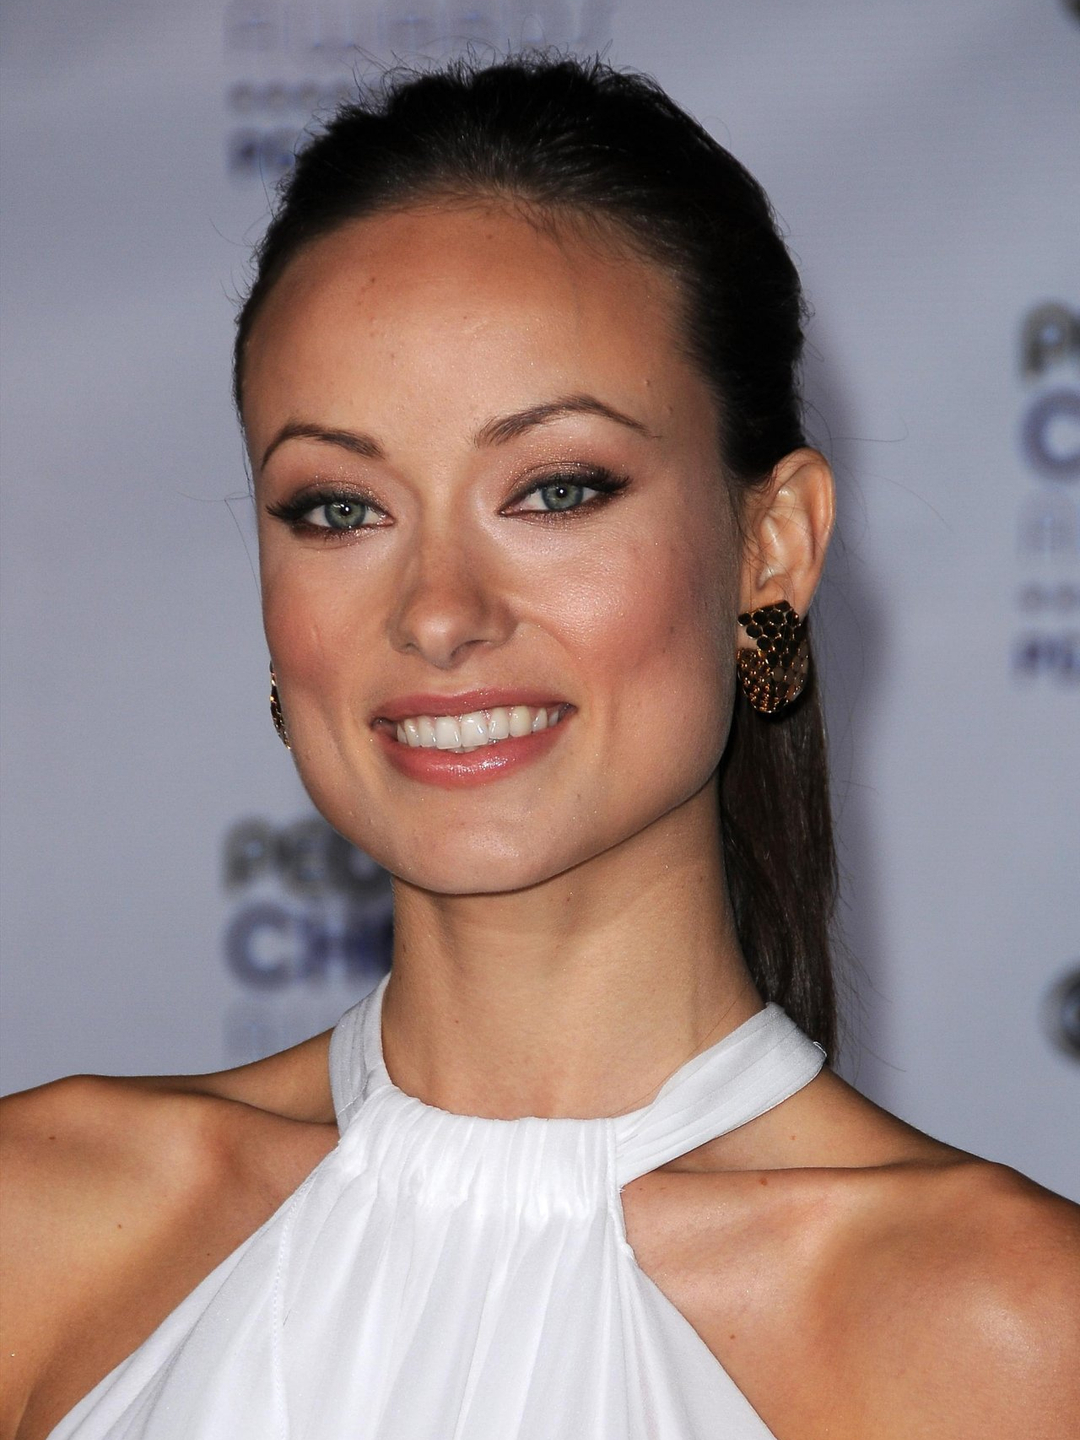 Olivia Wilde in her youth